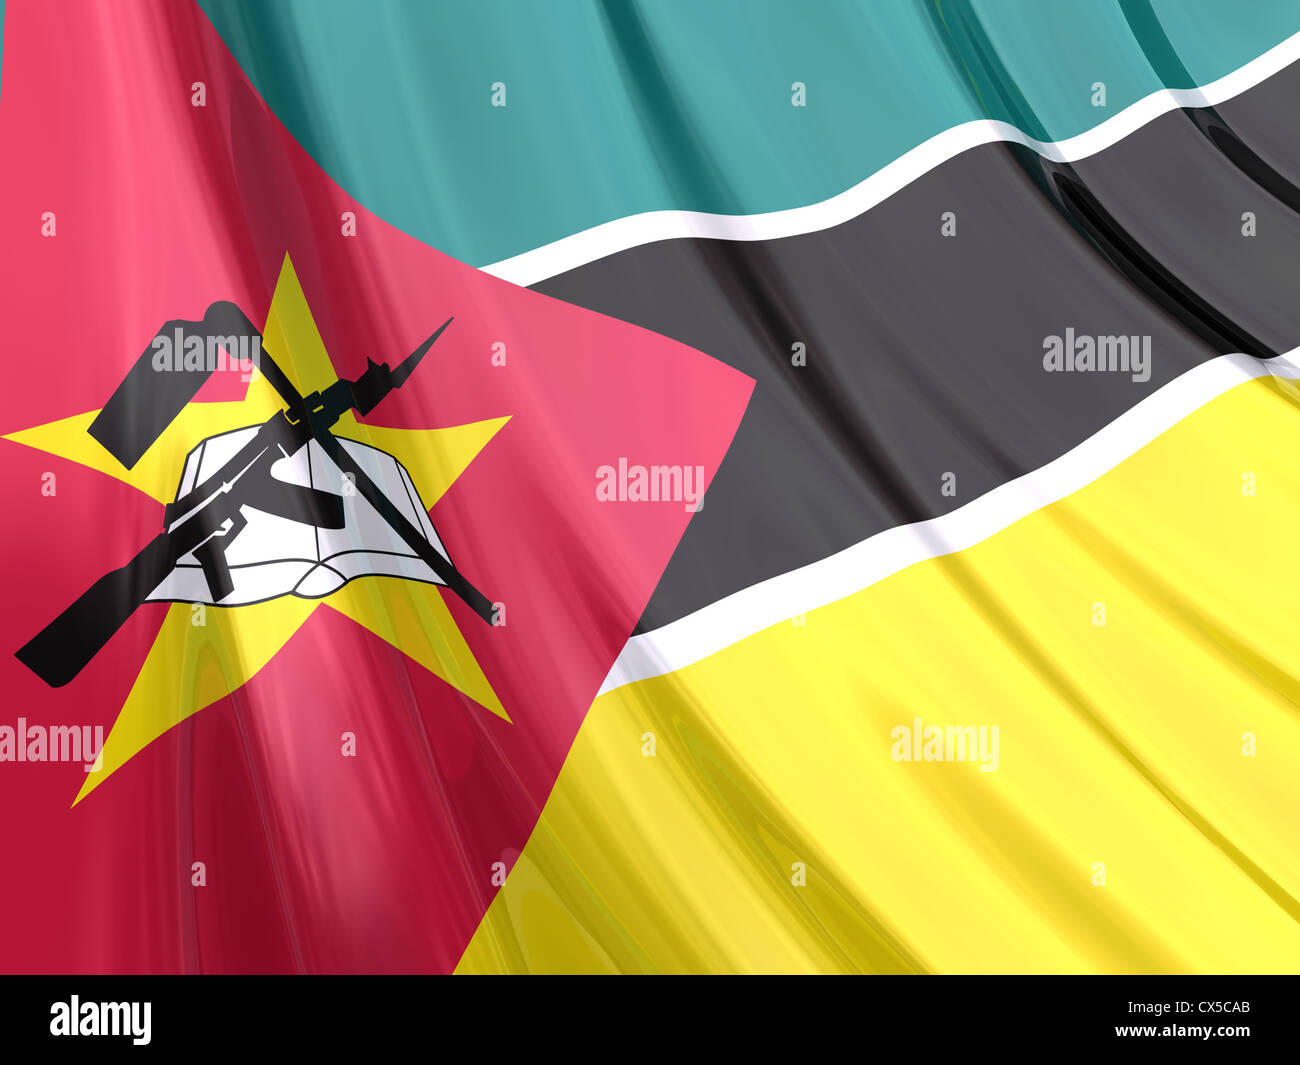 Glossy flag of Mozambique. Stock Photo